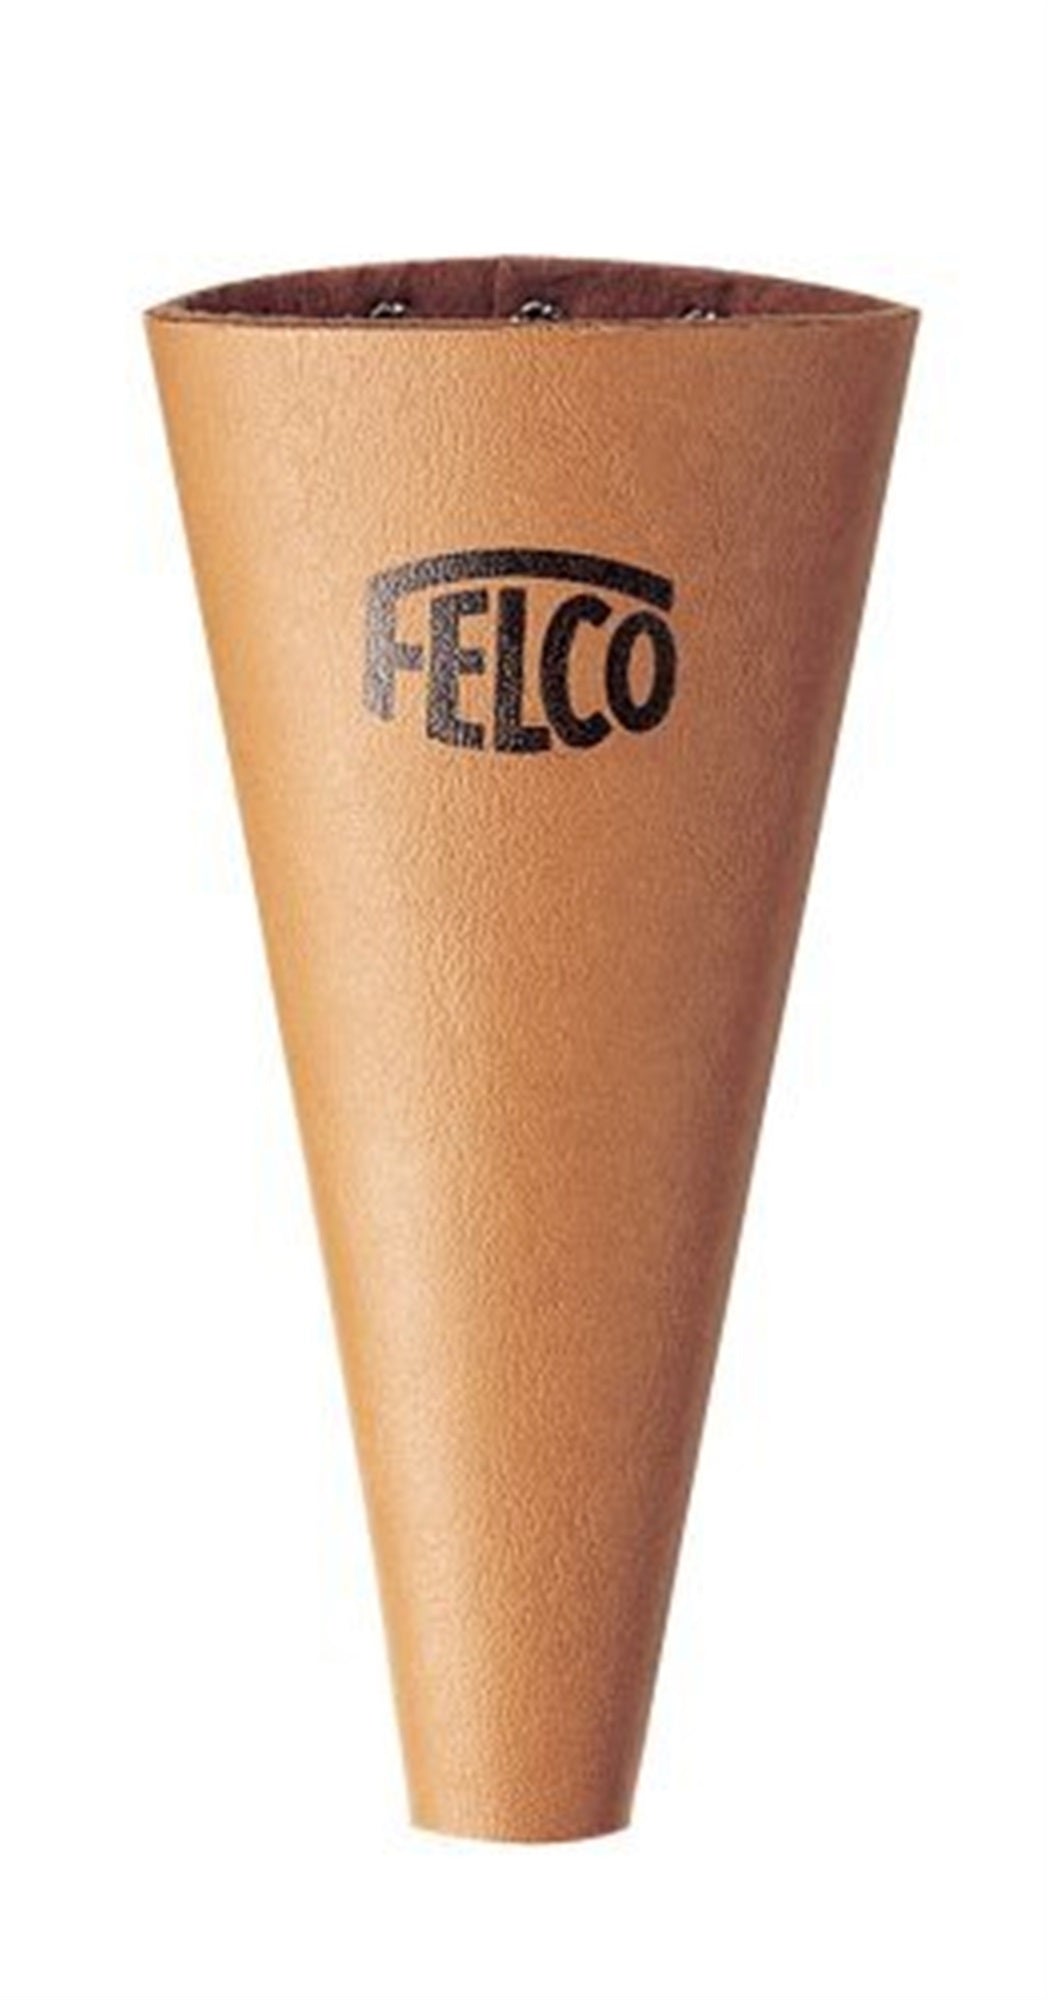 Felco Leather Scabbard Holster with Belt Clip